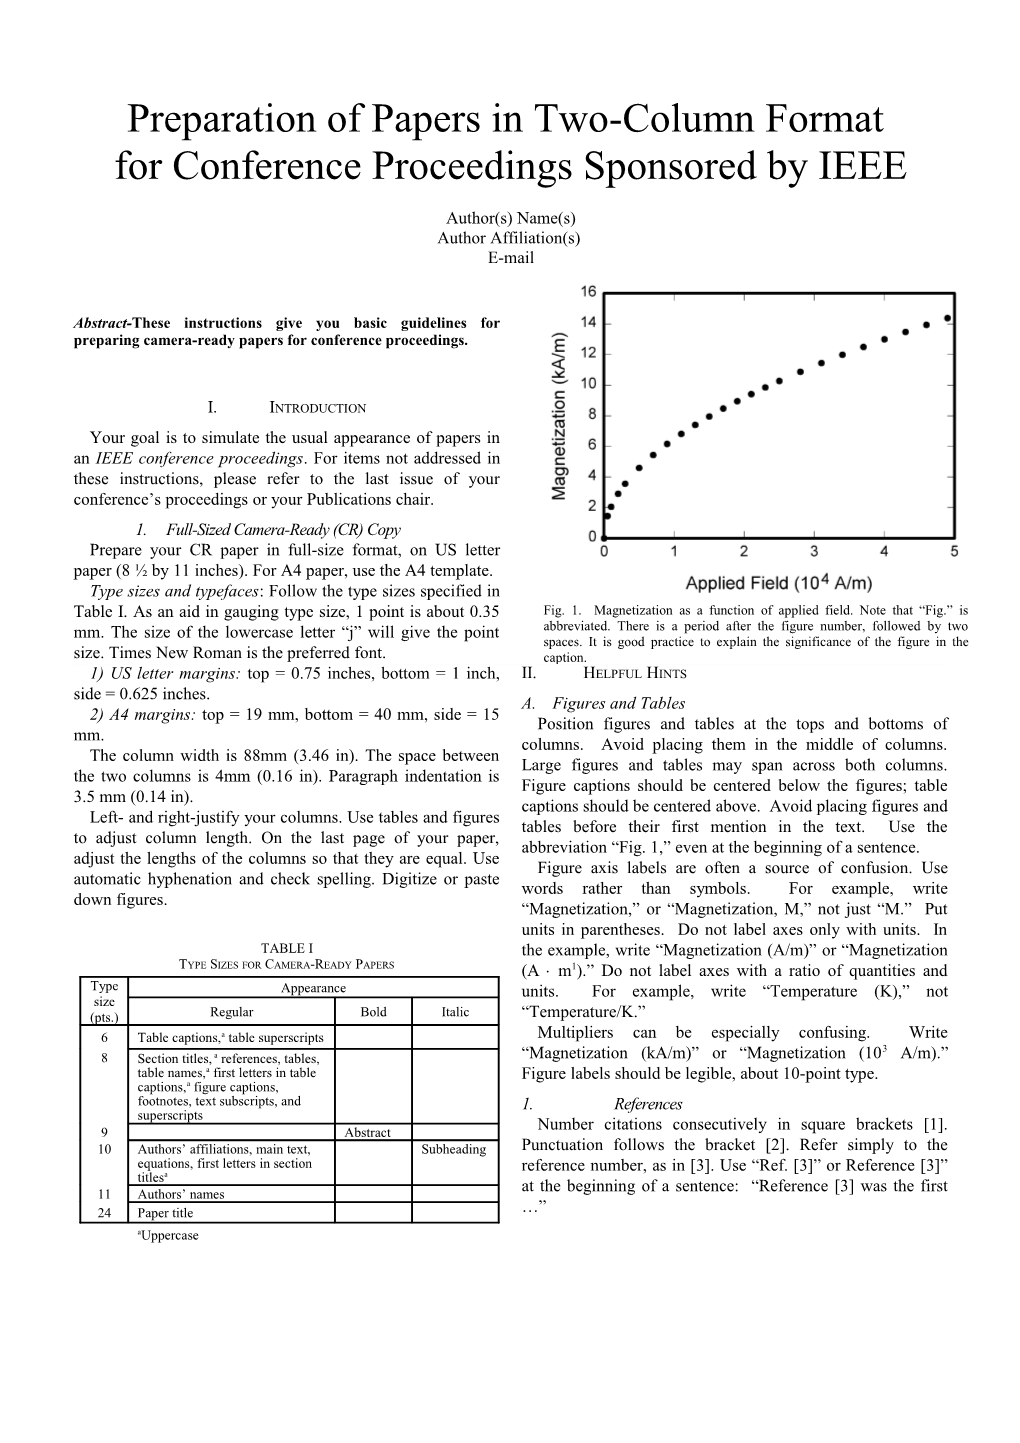 Preparation of Papers in Two-Column Format for the Proceedings of the 2004 Sarnoff Symposium